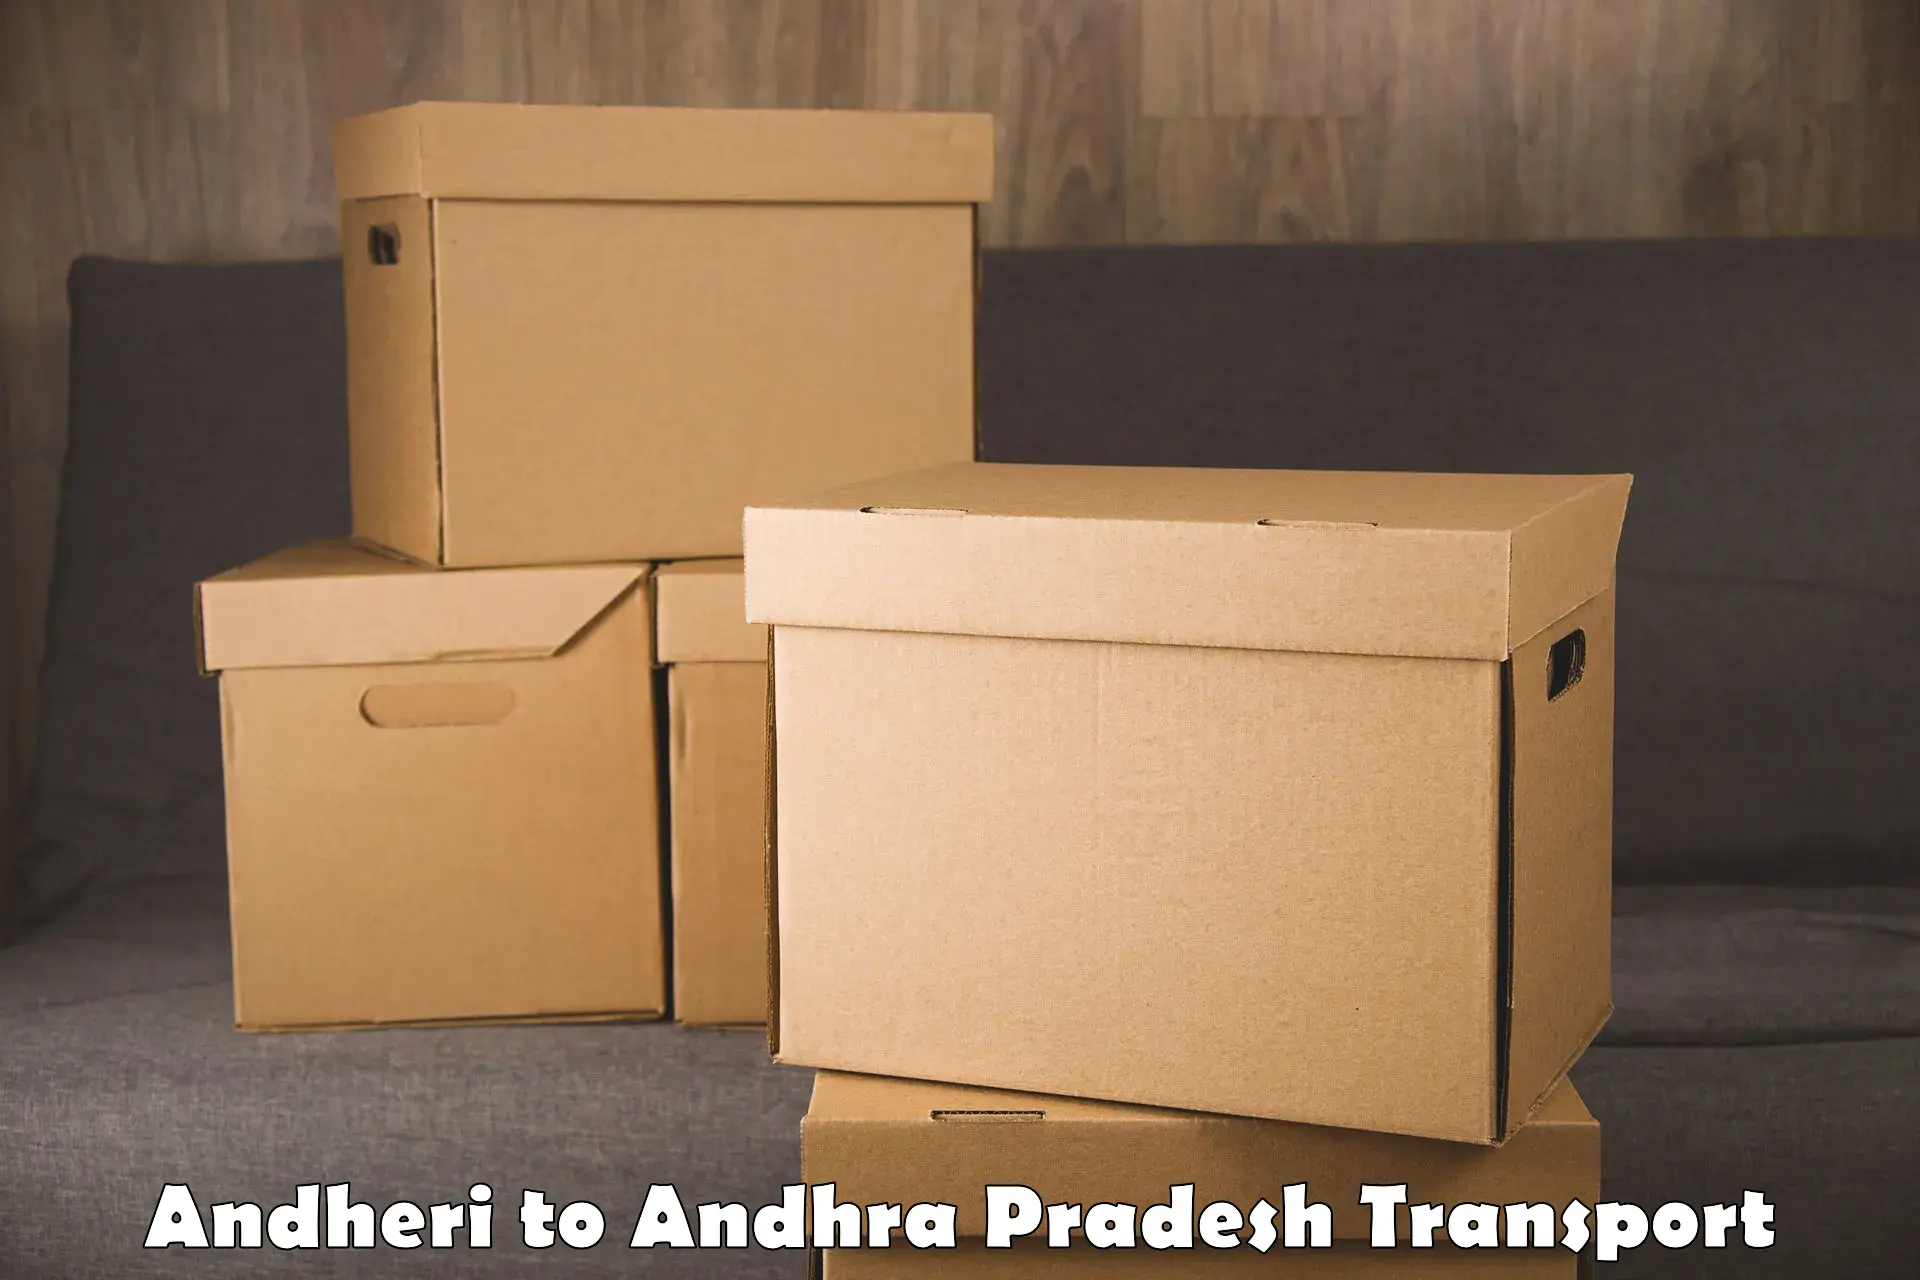 Truck transport companies in India Andheri to Sri City